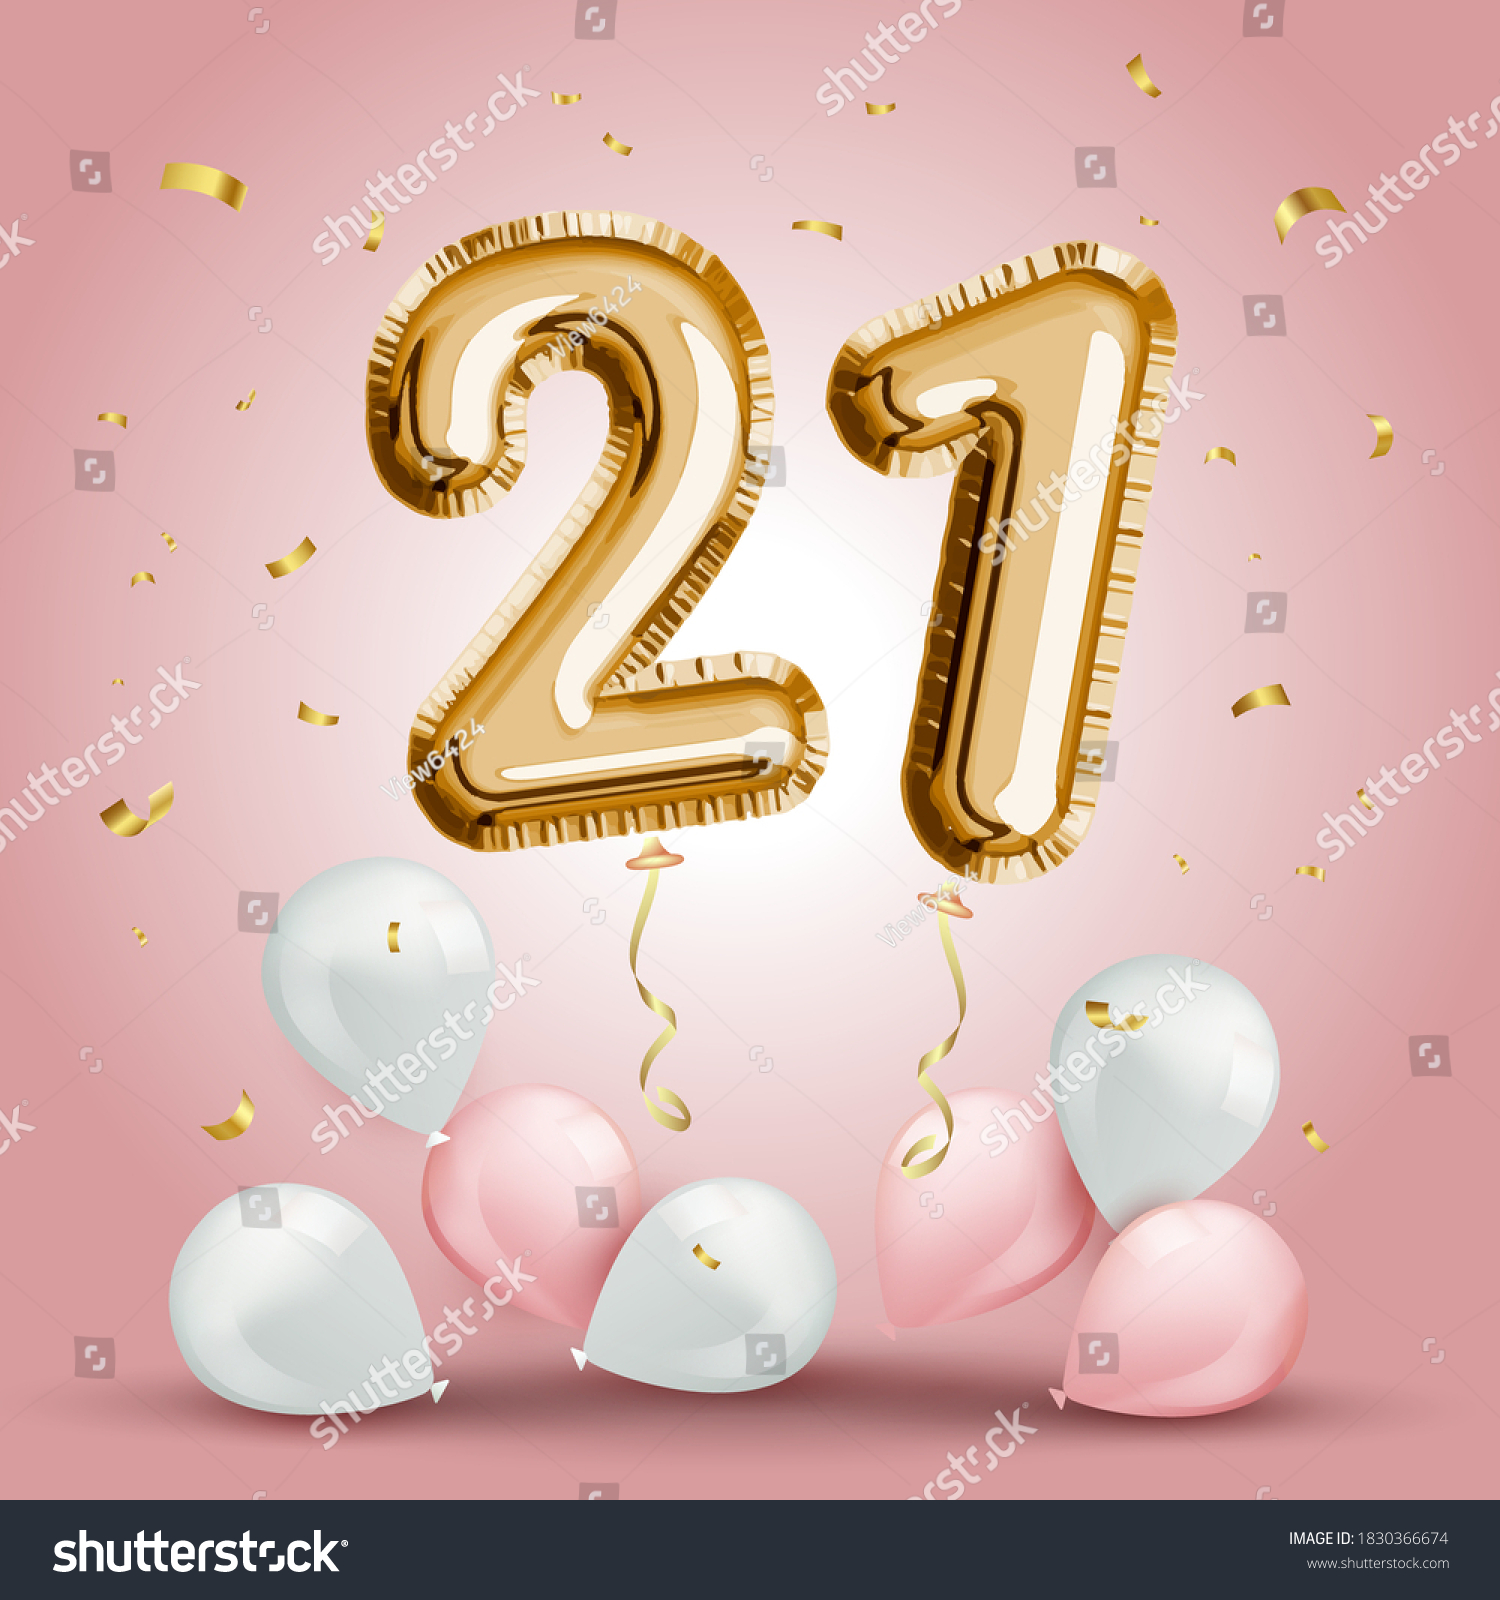 SVG of Elegant Greeting celebration twenty one years birthday. Anniversary number 21 foil gold balloon. Happy birthday, congratulations poster. Golden numbers with sparkling golden confetti. Vector svg